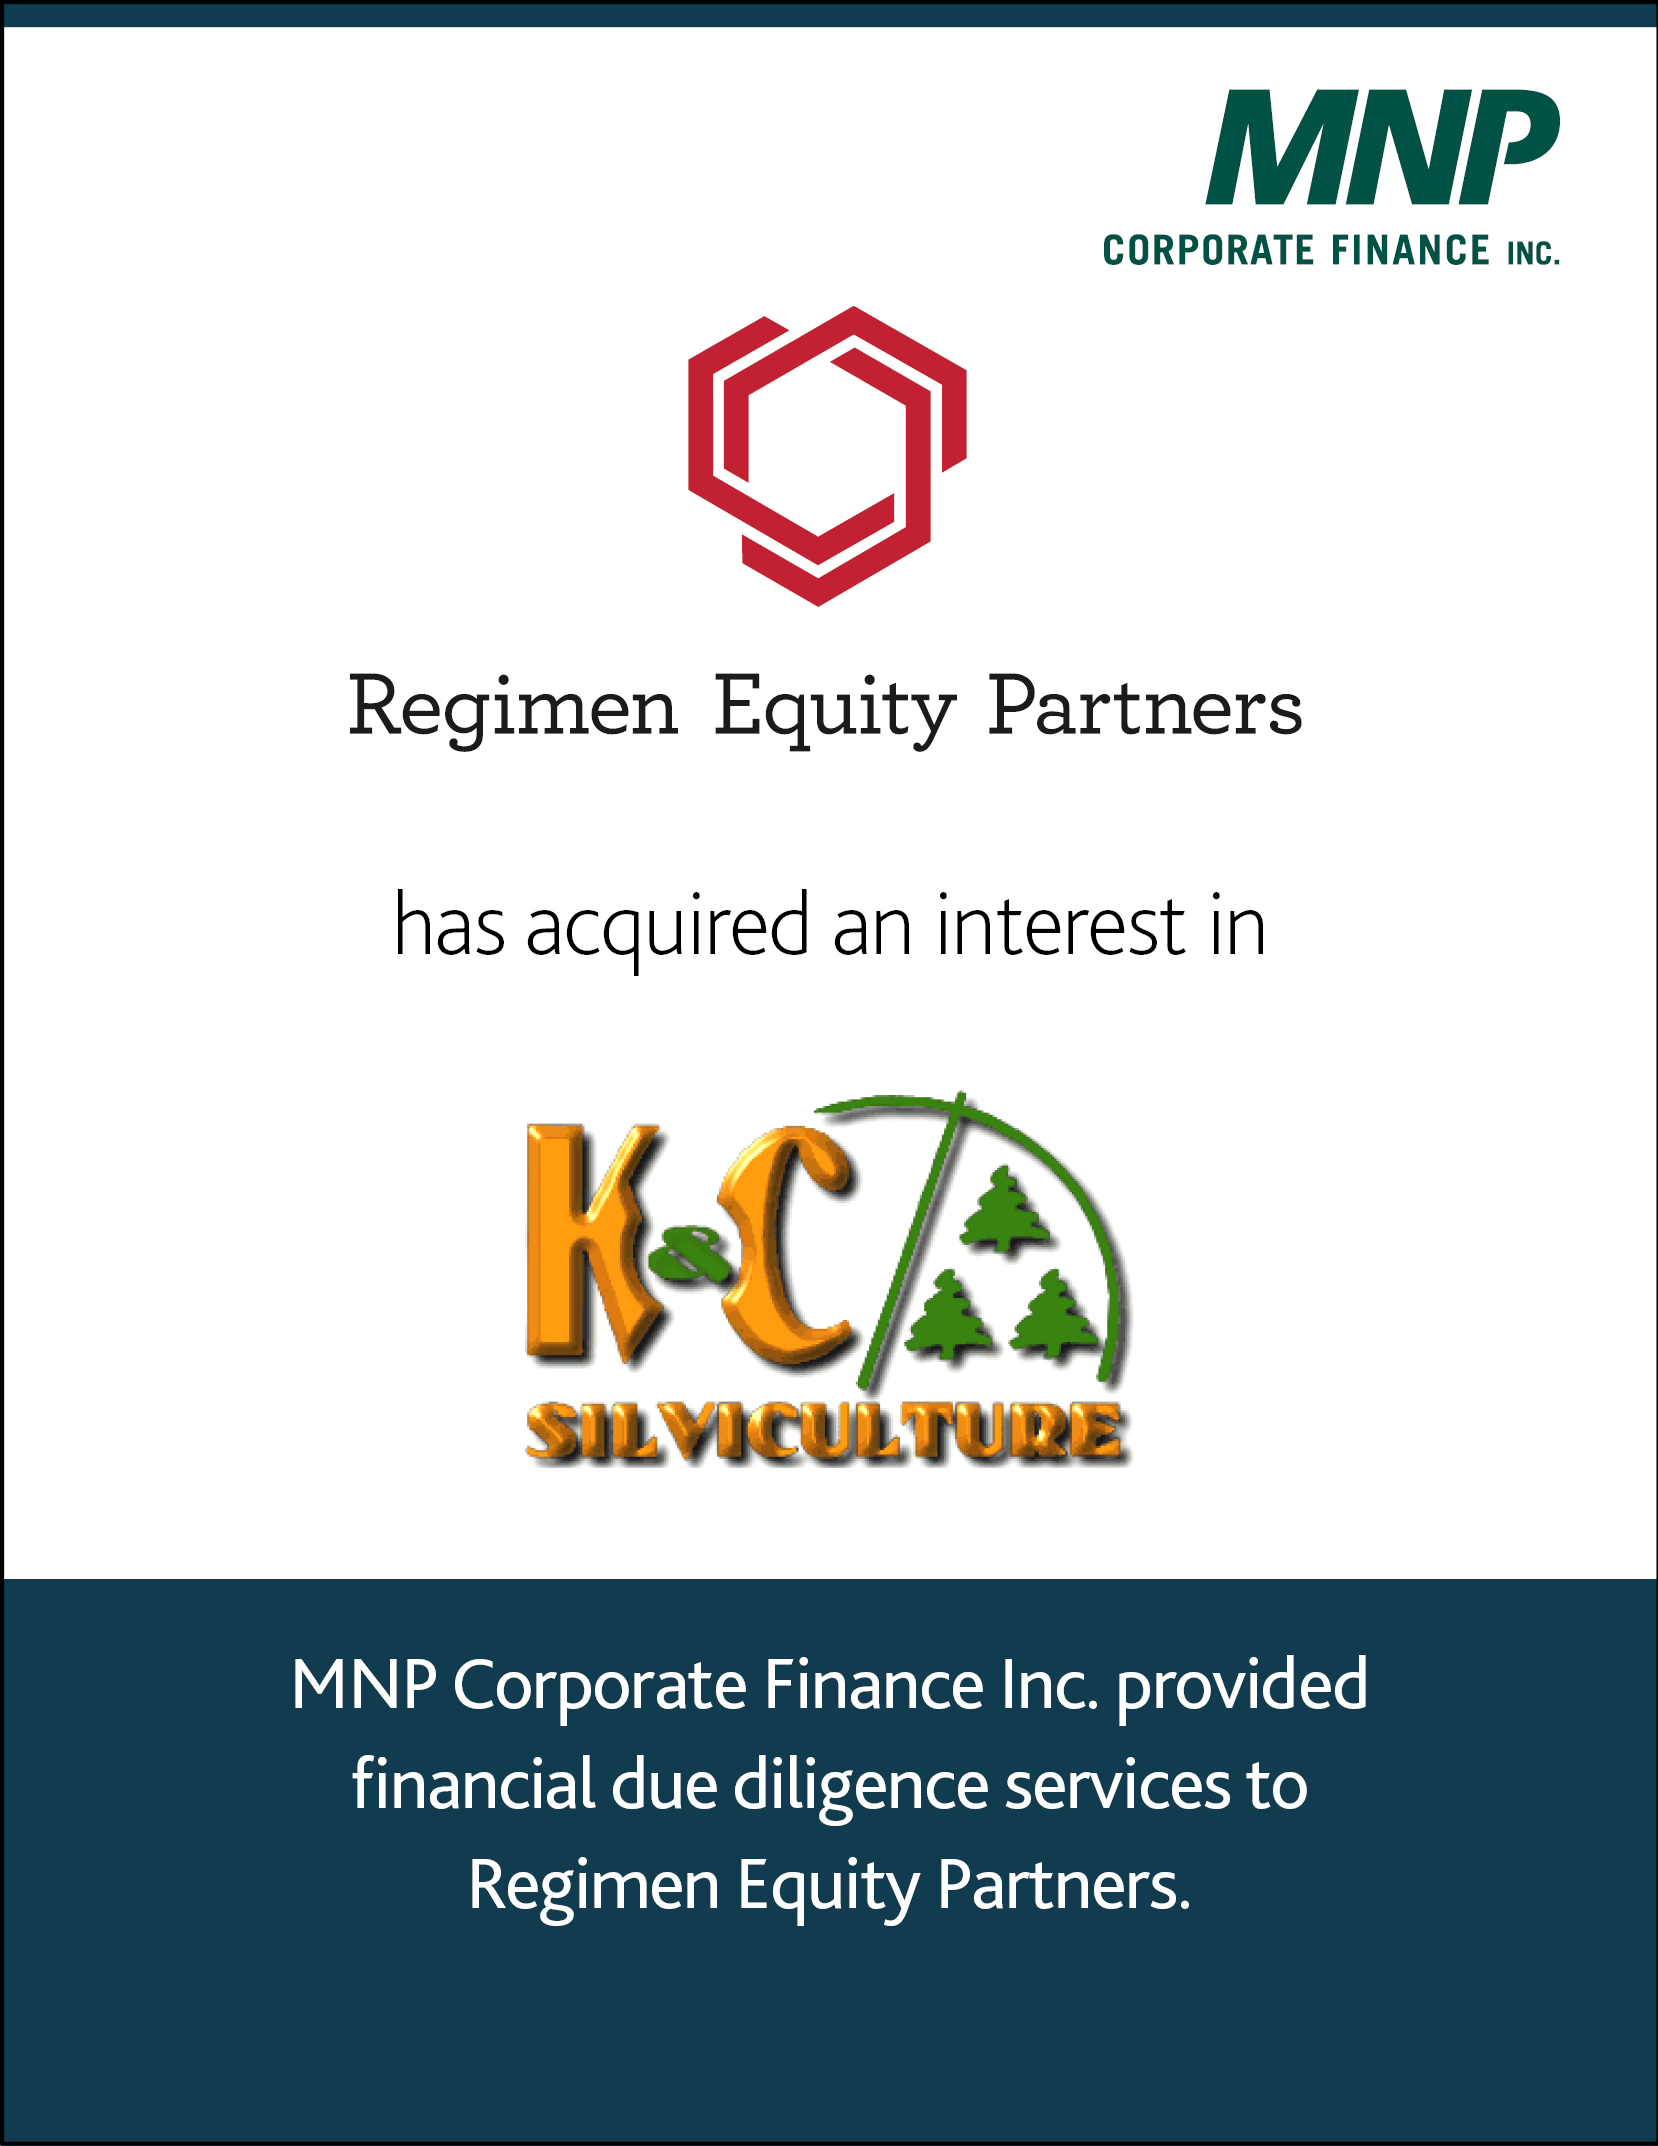 Regimen Equity Partners has acquired an interest in K&C Silviculture.